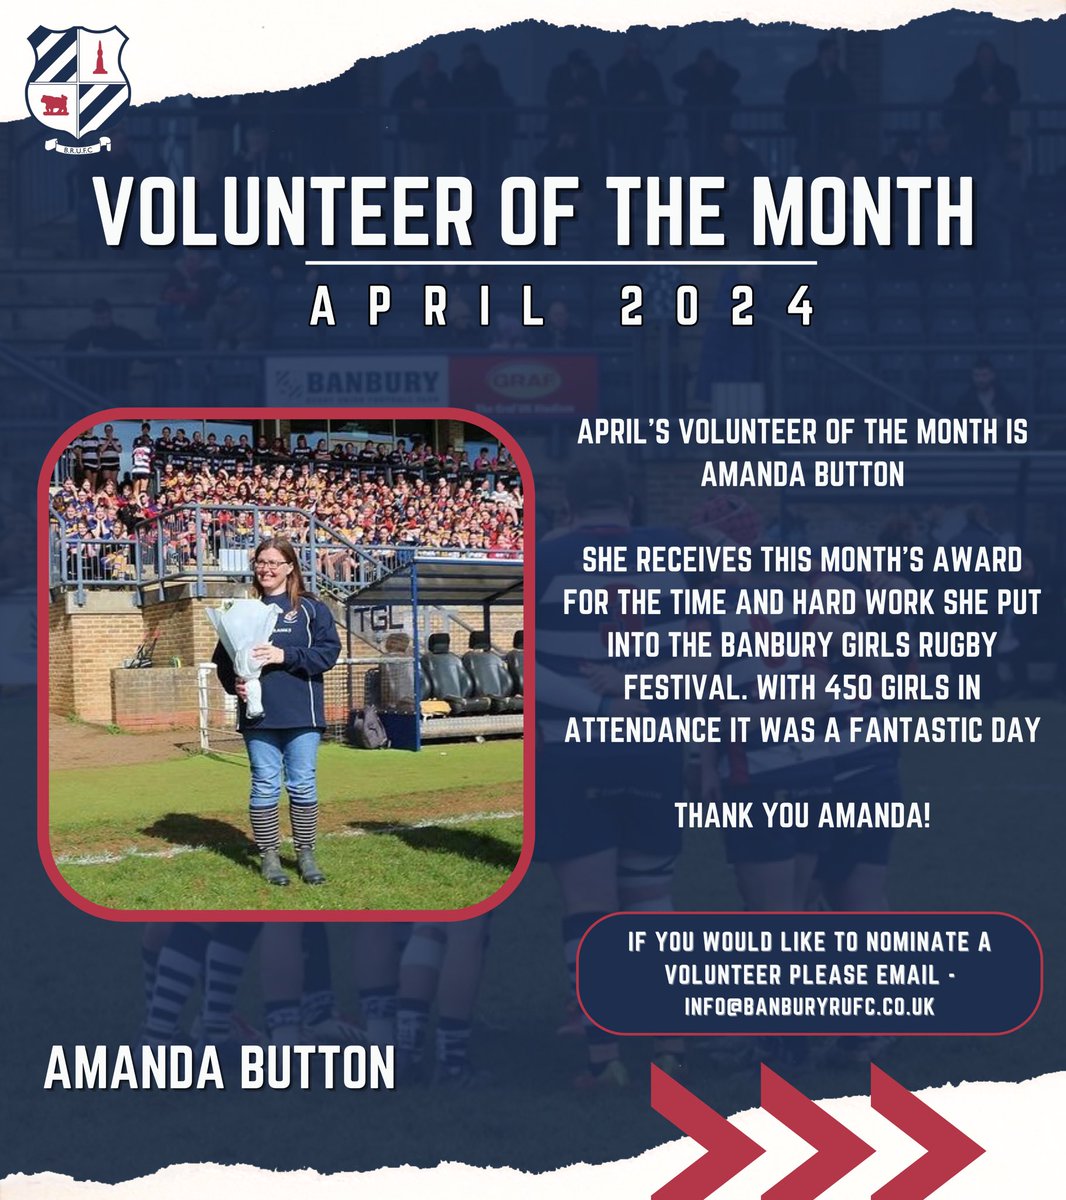 🐂 𝗩𝗢𝗟𝗨𝗡𝗧𝗘𝗘𝗥 𝗢𝗙 𝗧𝗛𝗘 𝗠𝗢𝗡𝗧𝗛 | 𝗔𝗣𝗥𝗜𝗟 🐂 April’s Volunteer of the Month is Amanda Button Thank You Amanda! If you would like to nominate a volunteer please email - info@banburyrufc.co.uk banburyrufc.com/news/volunteer… #BanburyRUFC #VolunteerOfTheMonth #Rugby